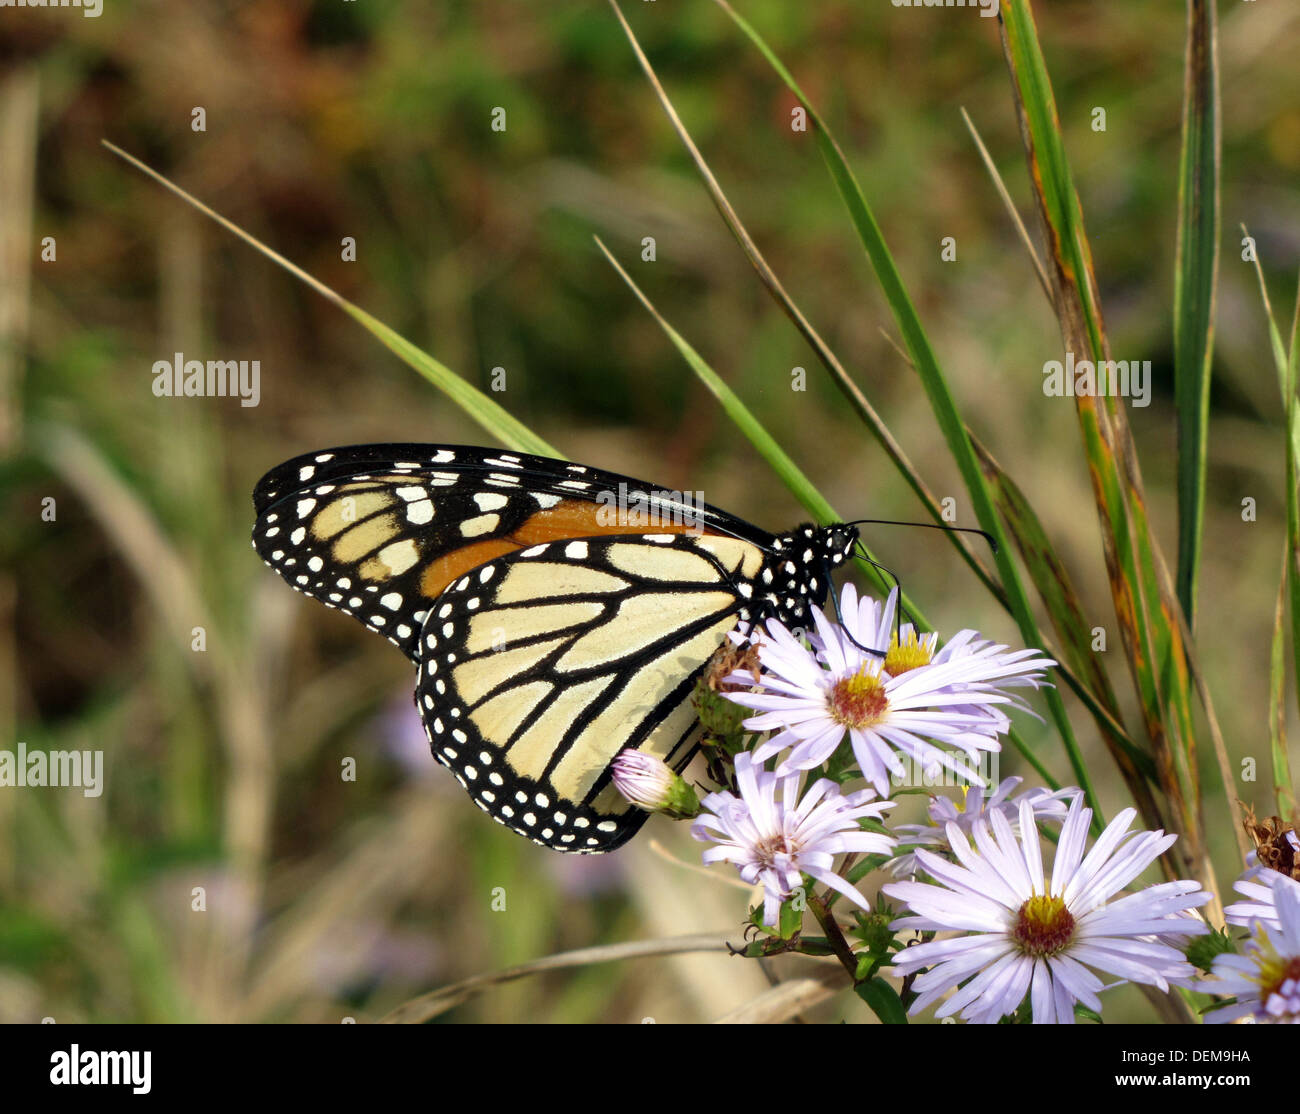 beautiful close up of butterfly sitting on a daisy Stock Photo